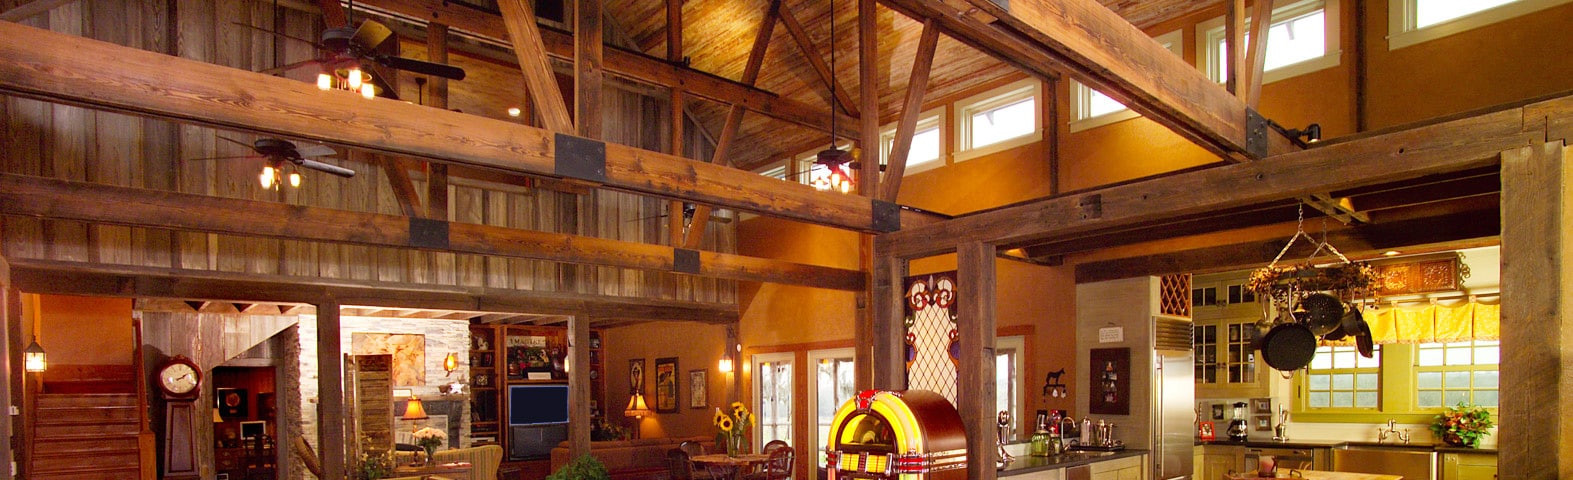 The Family Party Barn designed by Truehome